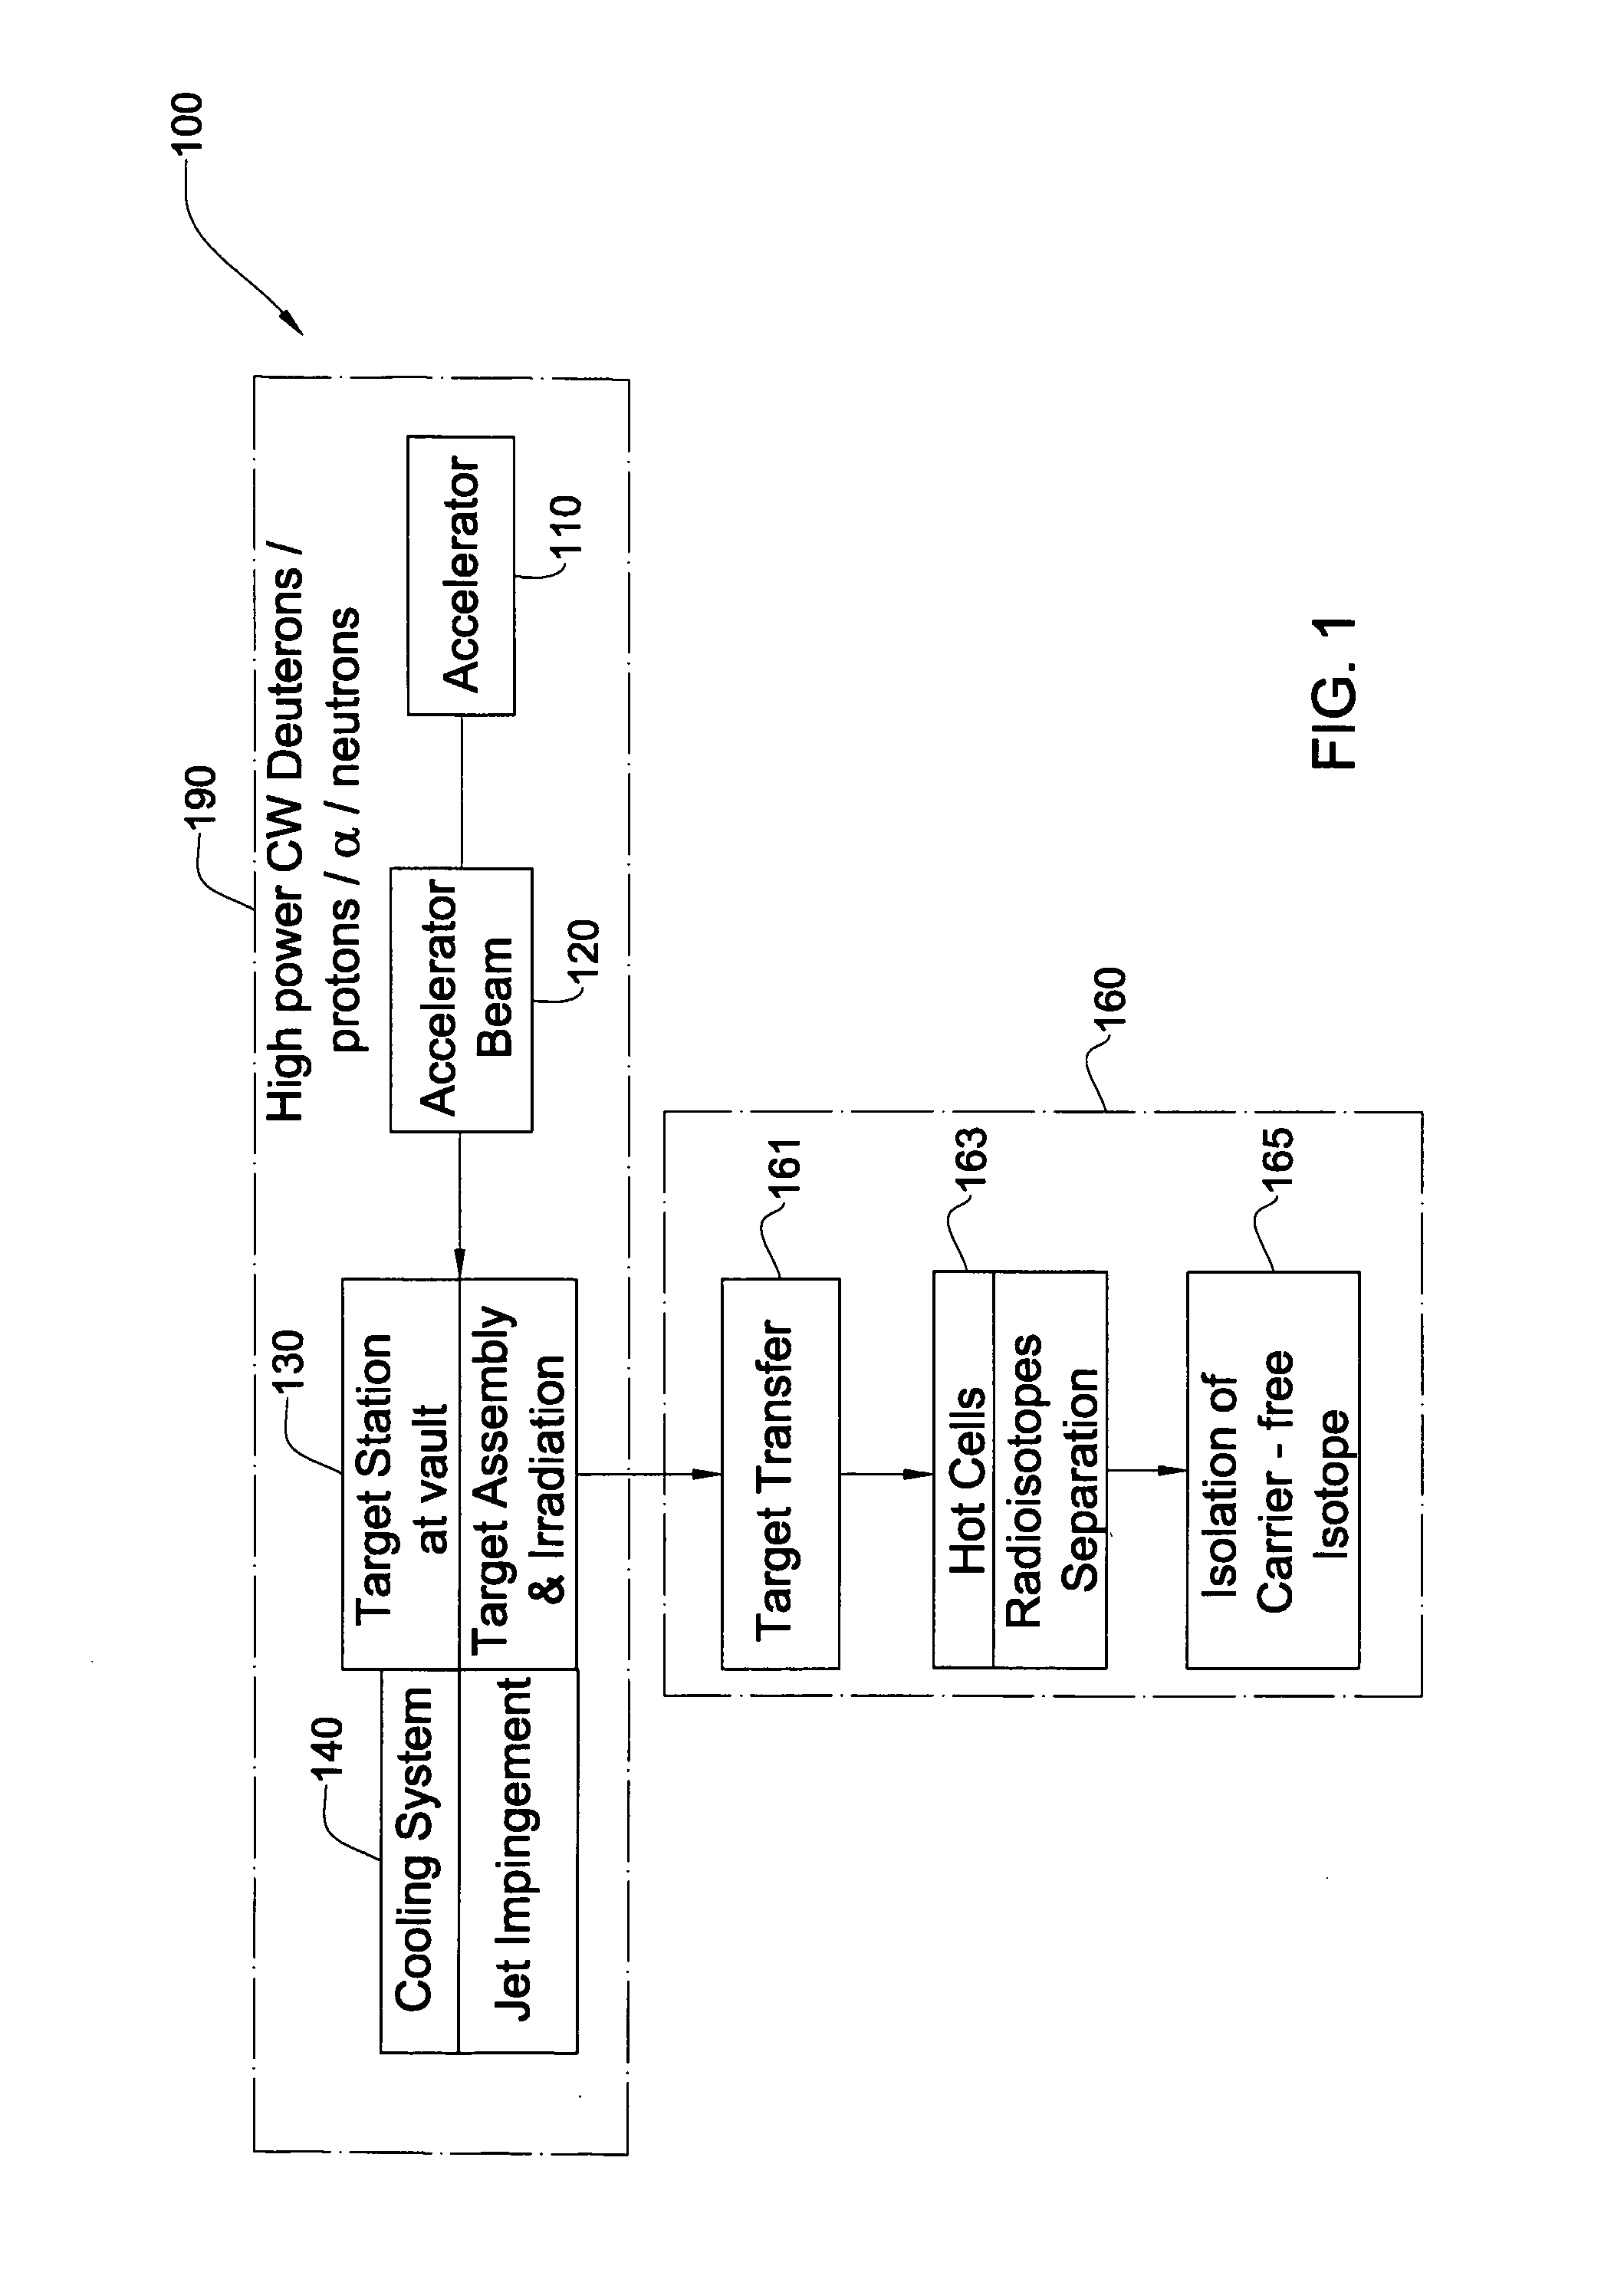 Method And System For Production Of Radioisotopes, And Radioisotopes Produced Thereby